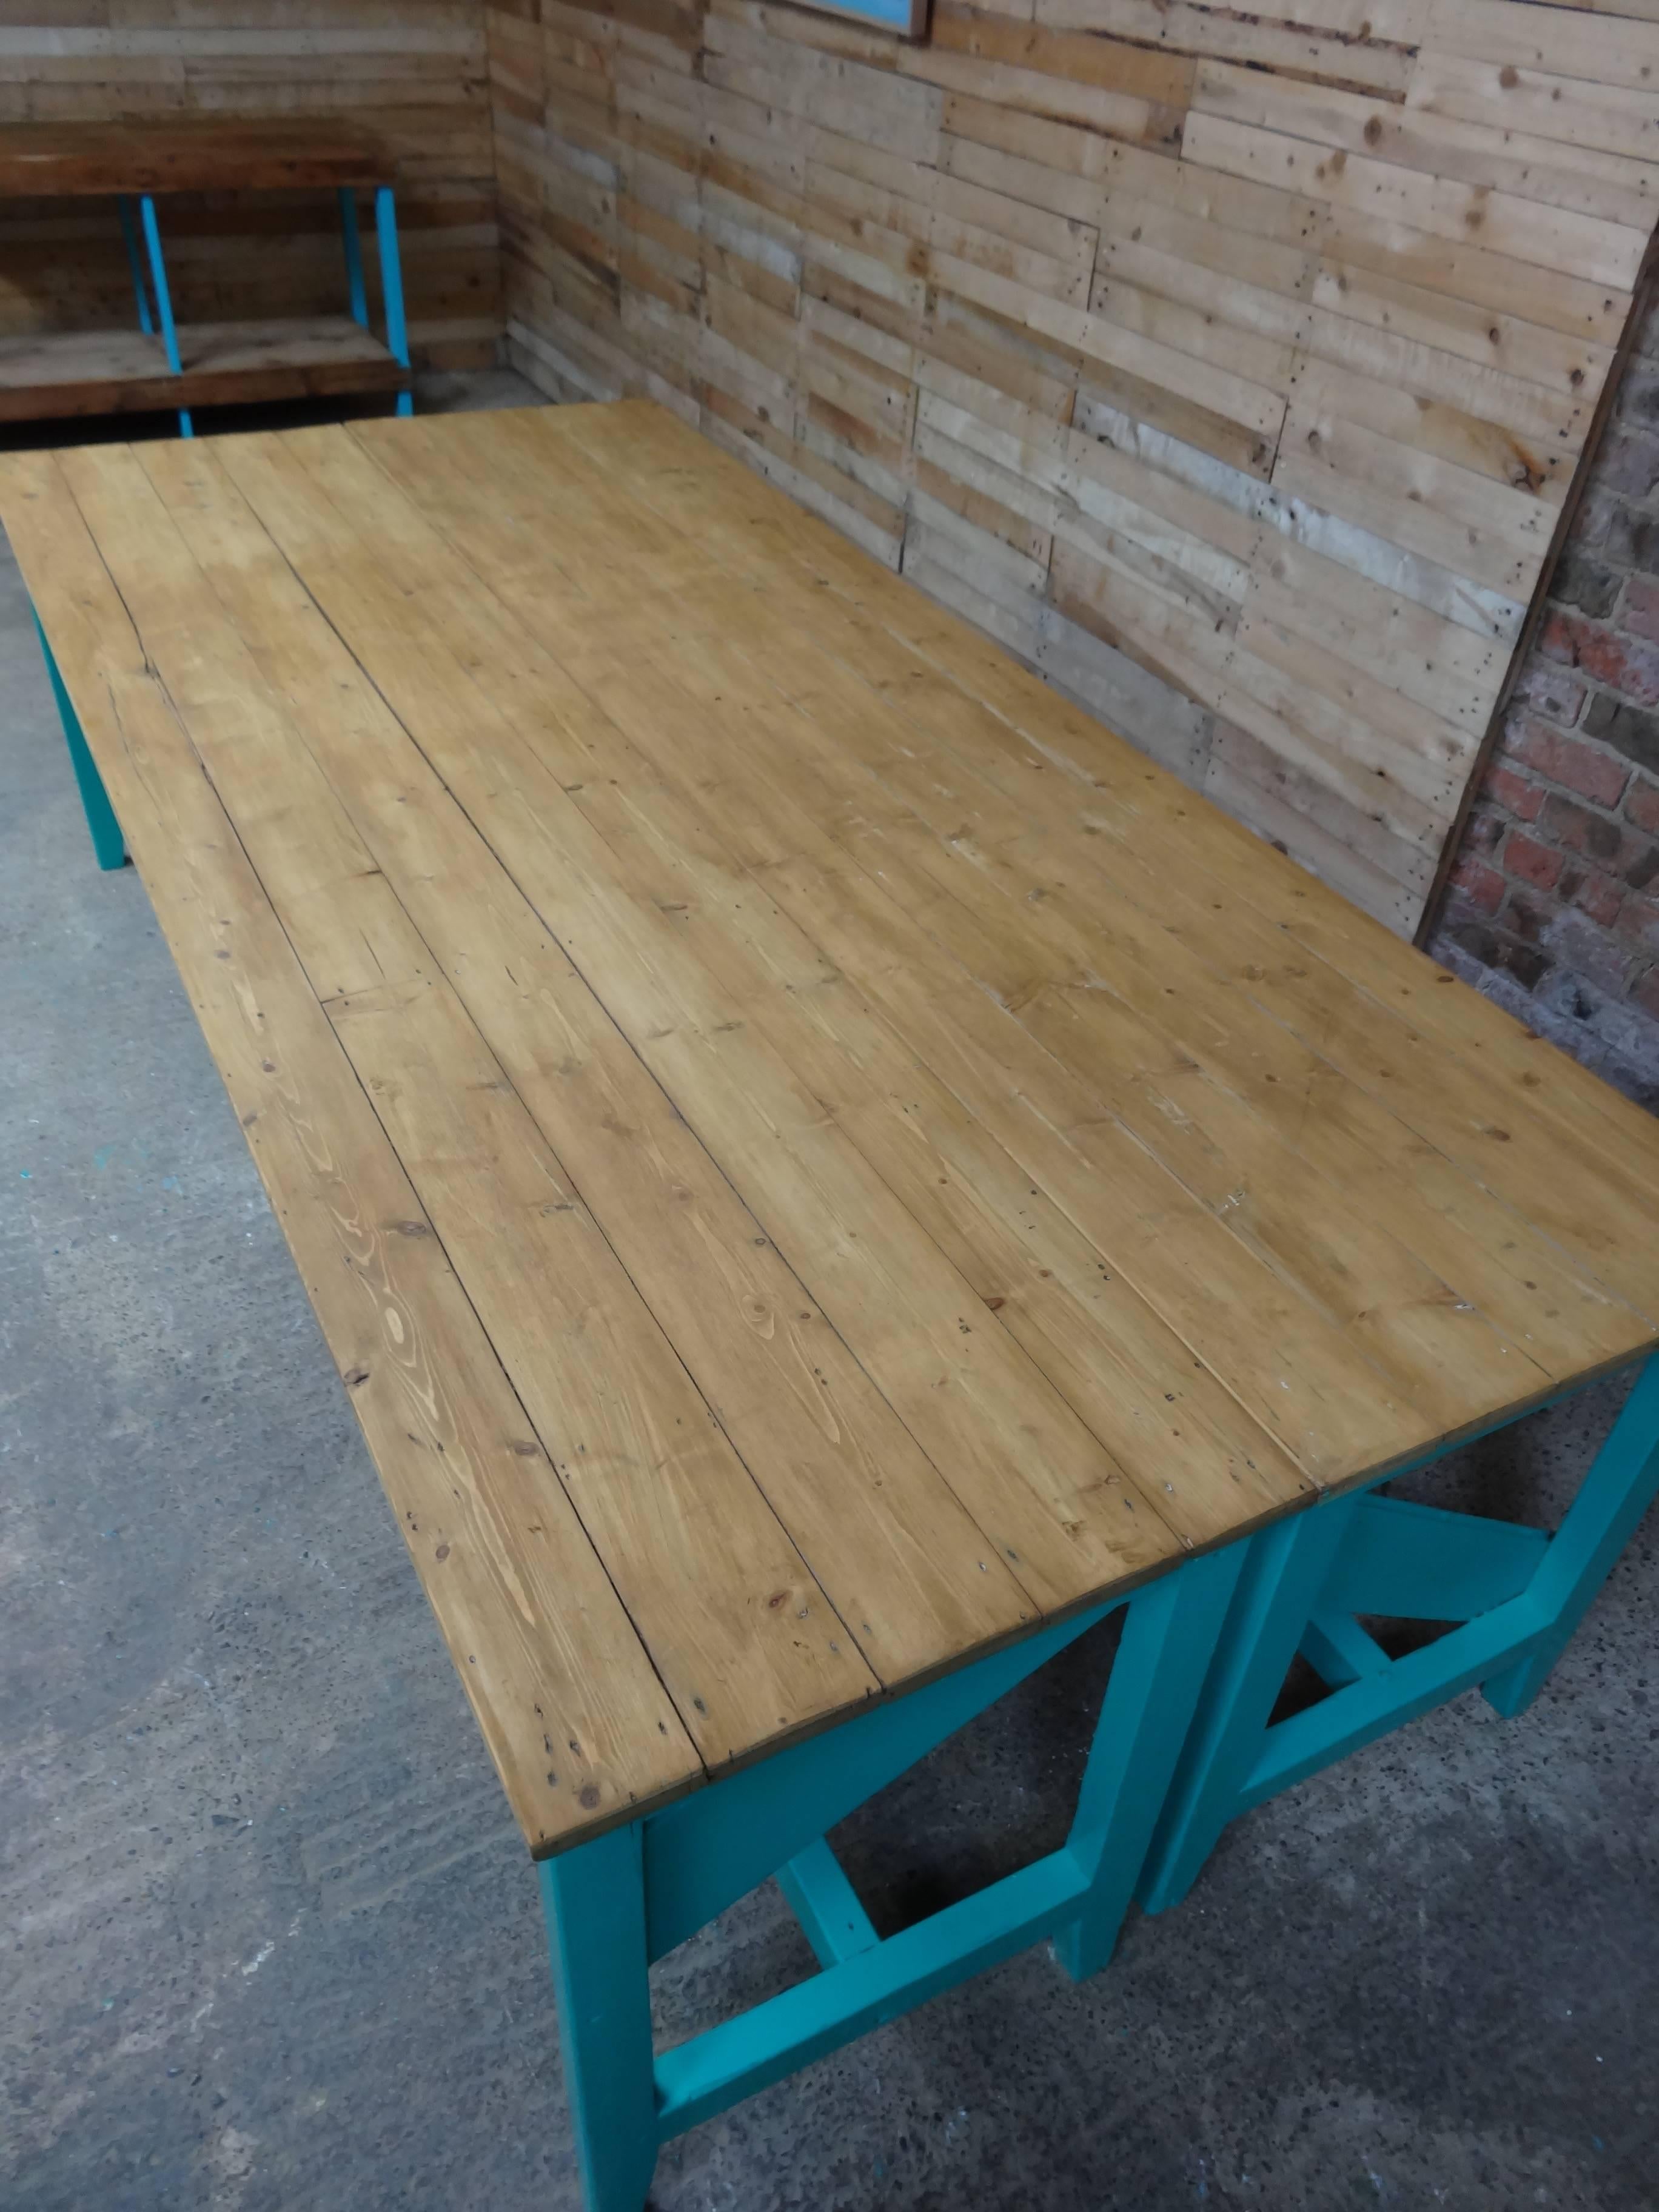 Industrial fabric cutting table we bought this out of the Windsor of Woollies knitwear mill, they made fabrics for the European royal families. this table would be ideal for a shop fitout to display goods, we have three other blue tables in this